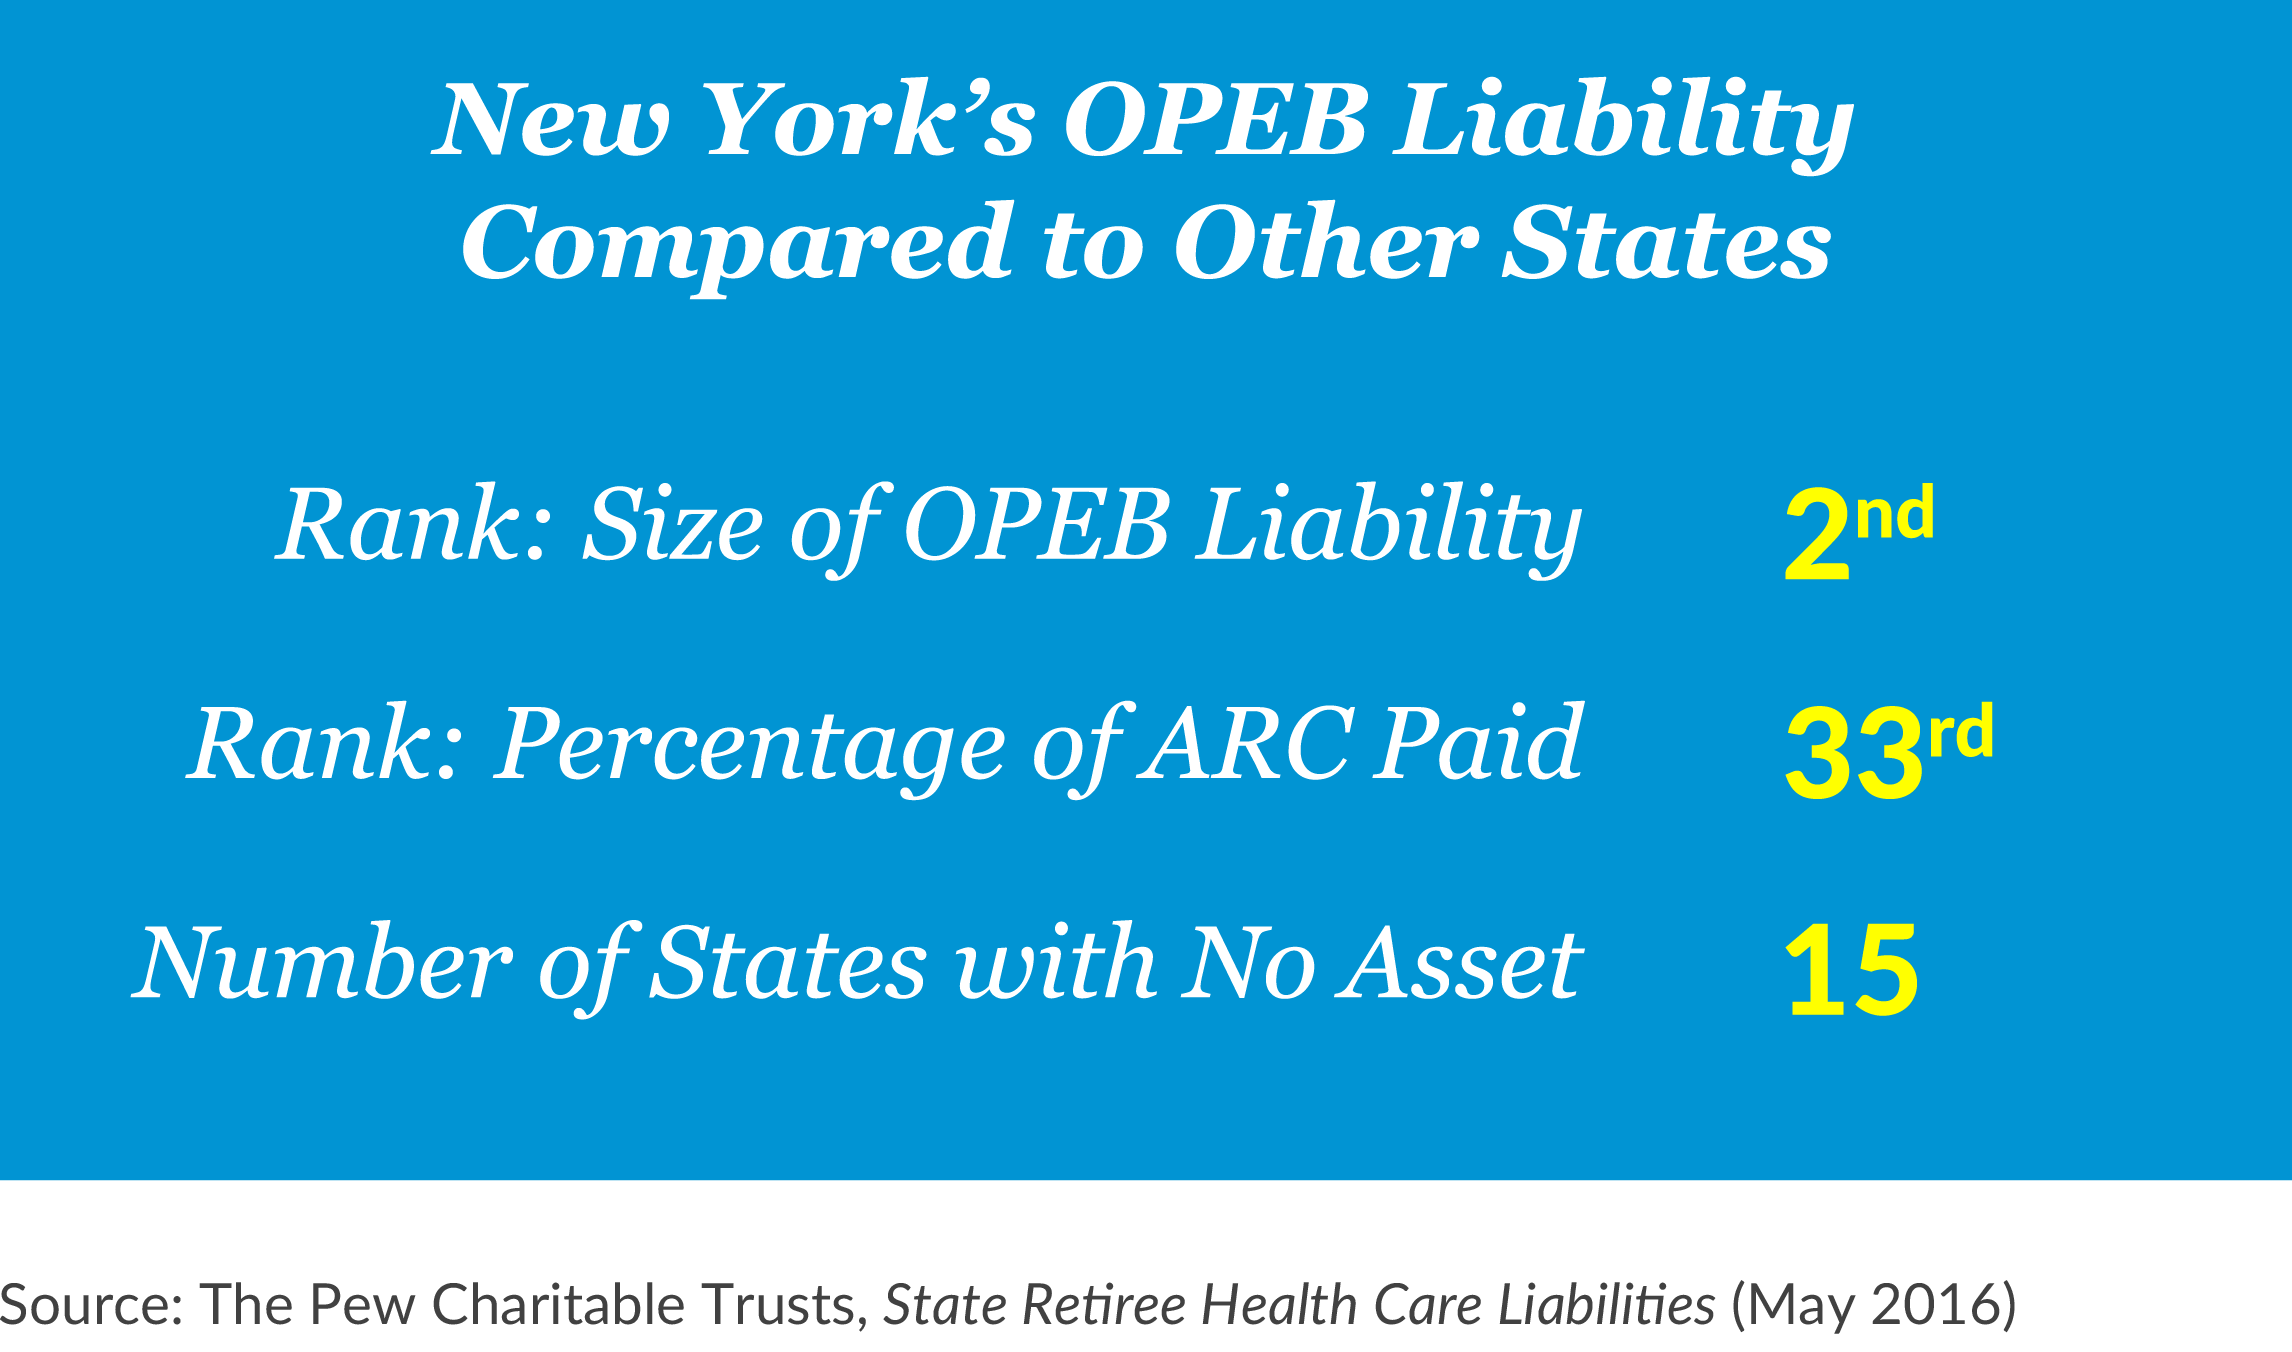 New York’s OPEB Liability Compared to Other States